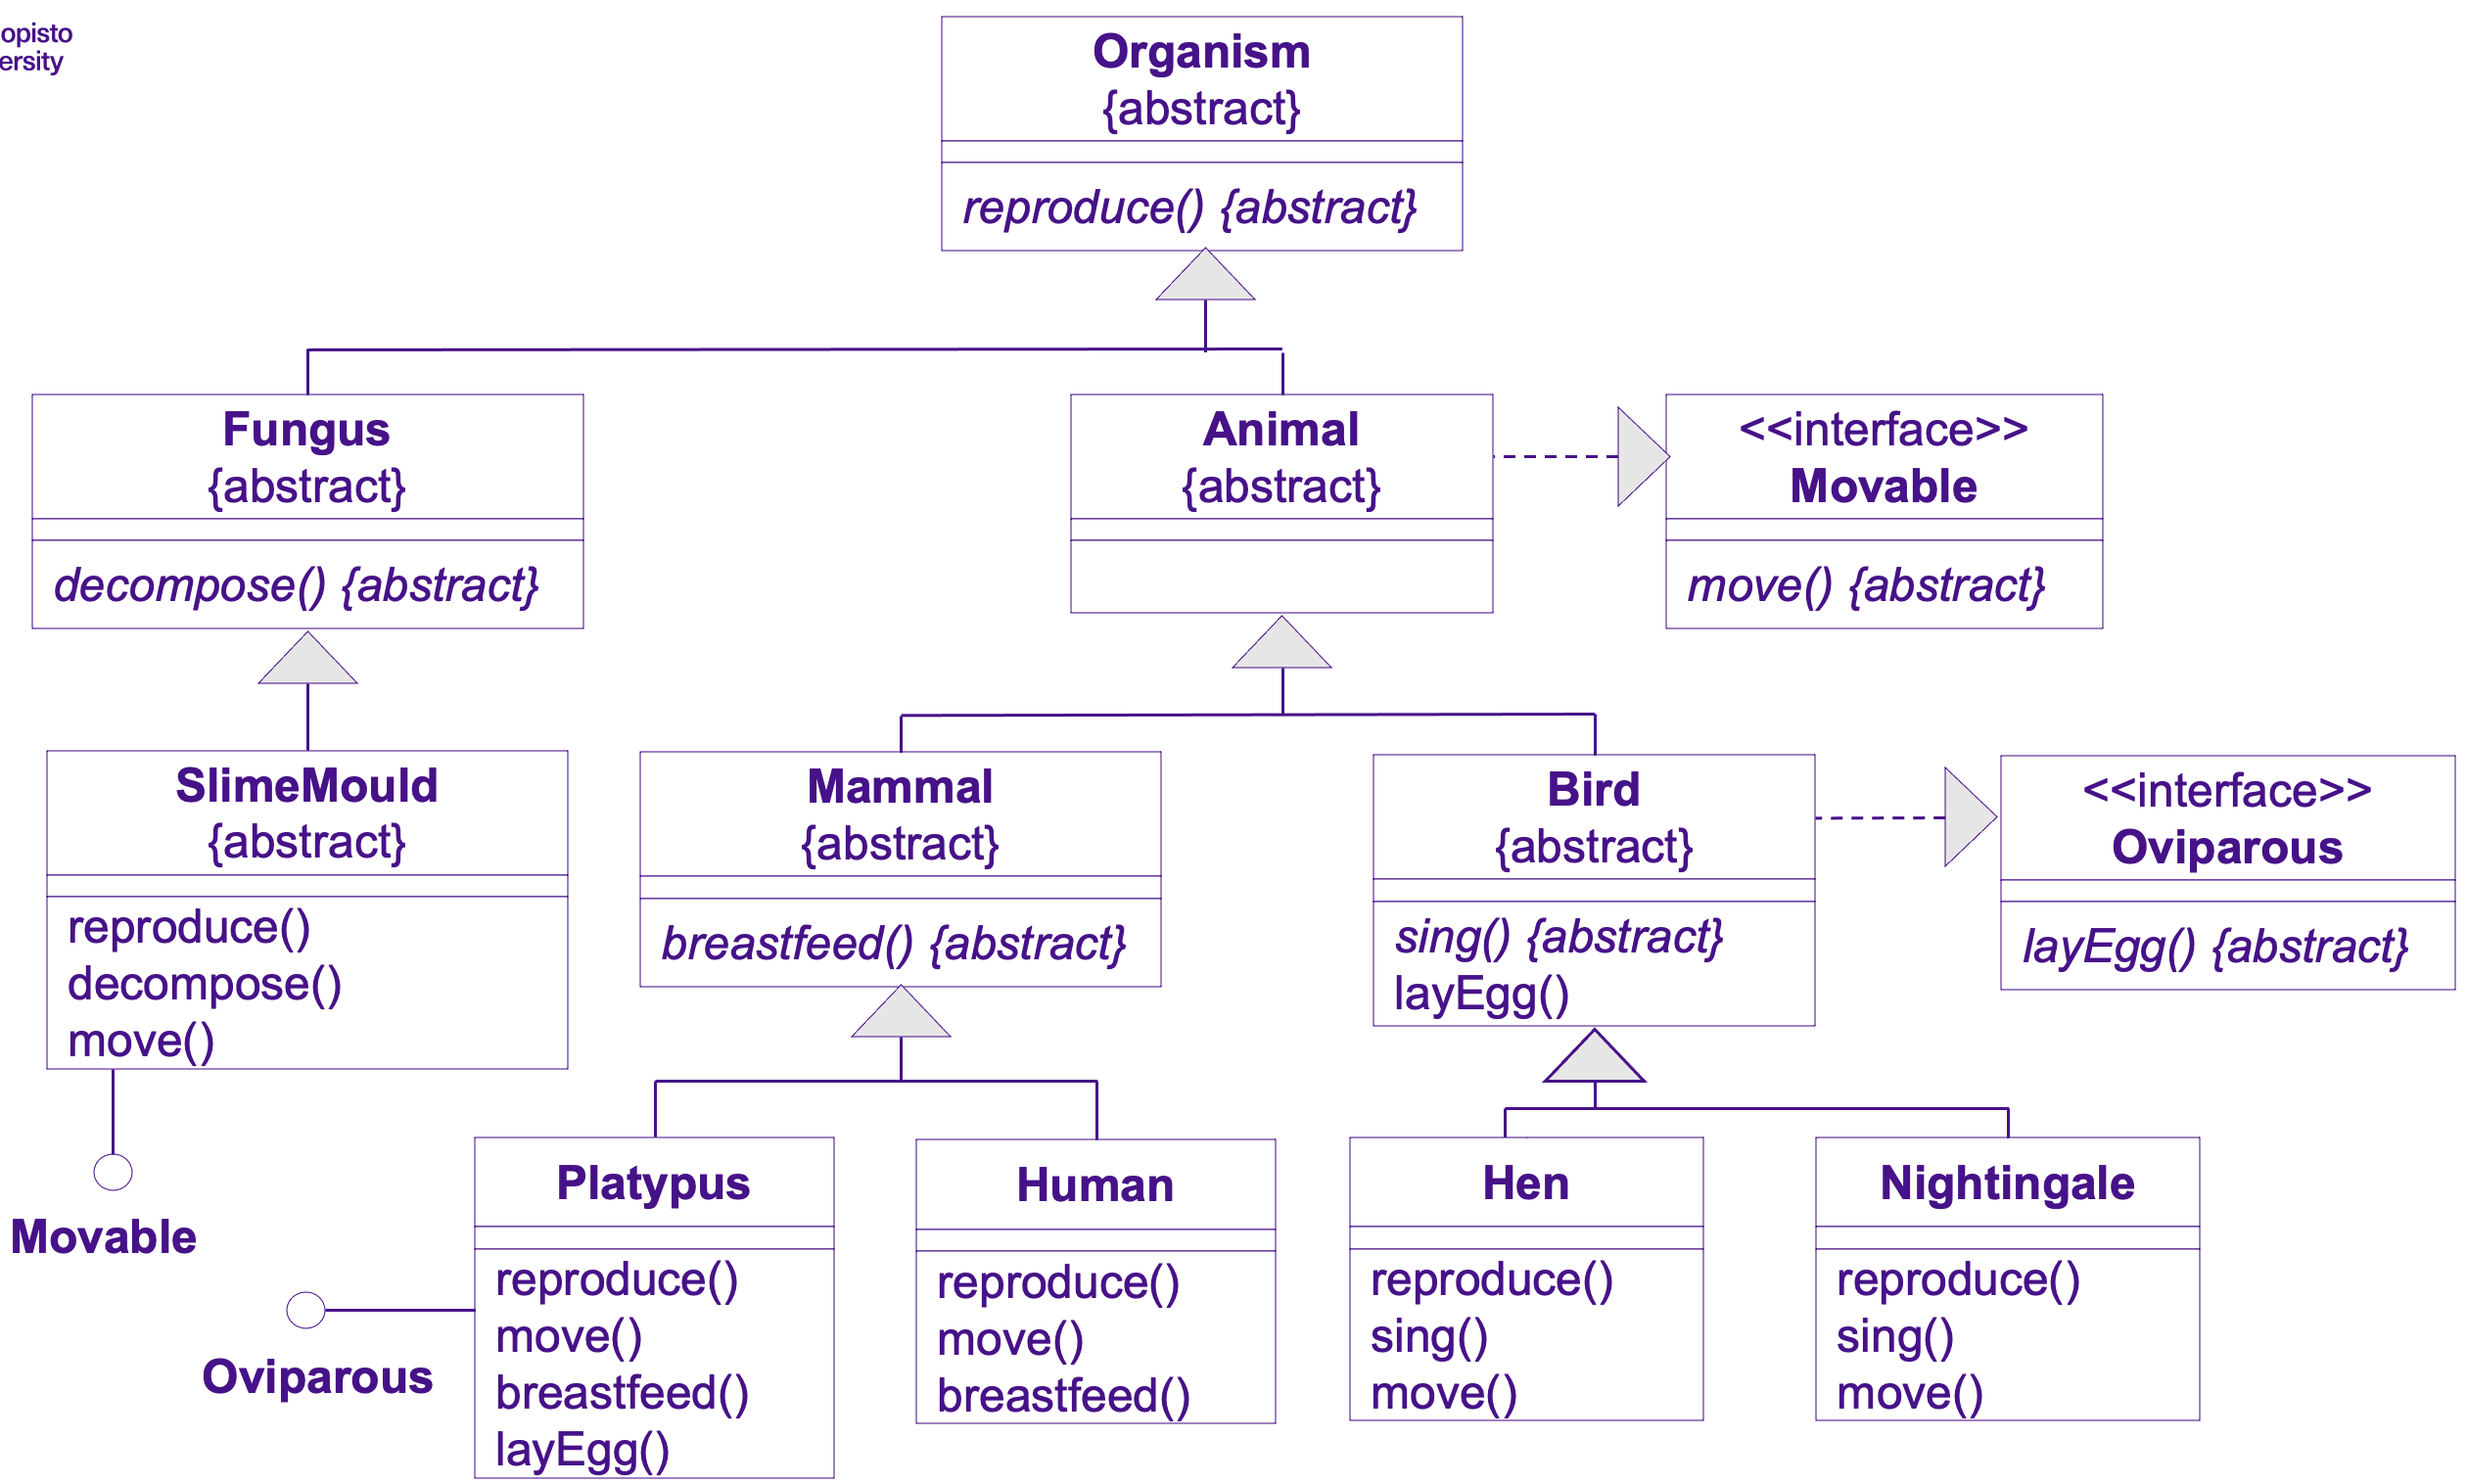 a picture with class hierarchy for organisms